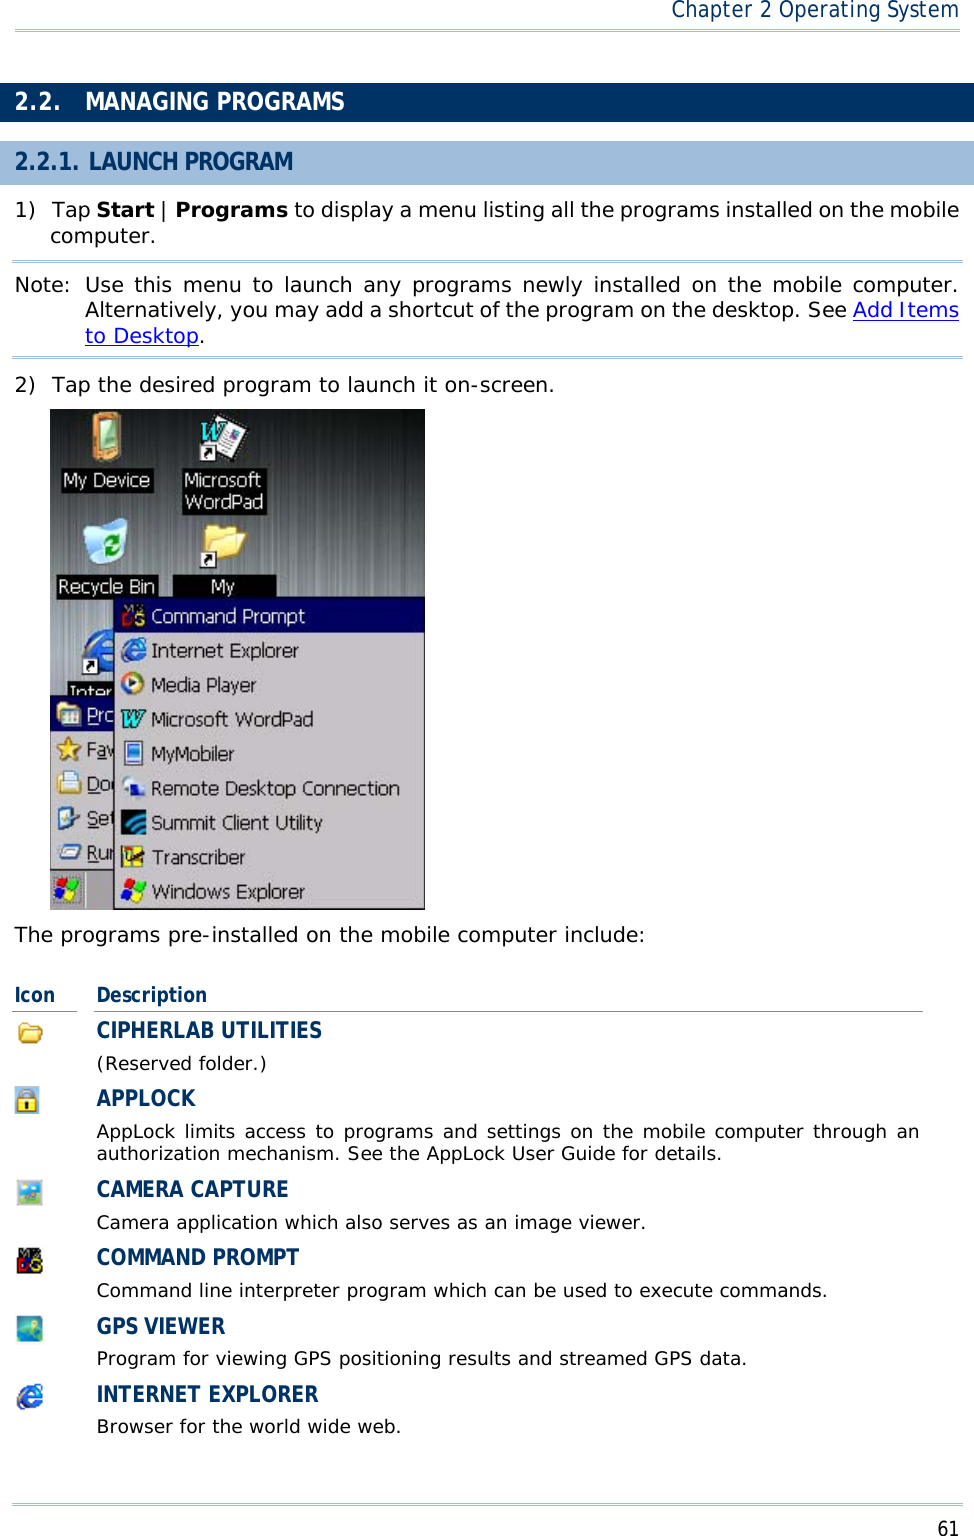 61Chapter 2 Operating System2.2. MANAGING PROGRAMS 2.2.1. LAUNCH PROGRAM 1) Tap Start |Programs to display a menu listing all the programs installed on the mobile computer.Note: Use this menu to launch any programs newly installed on the mobile computer. Alternatively, you may add a shortcut of the program on the desktop. See Add Itemsto Desktop.2) Tap the desired program to launch it on-screen. The programs pre-installed on the mobile computer include: Icon  DescriptionCIPHERLAB UTILITIES (Reserved folder.) APPLOCKAppLock limits access to programs and settings on the mobile computer through an authorization mechanism. See the AppLock User Guide for details. CAMERA CAPTURE Camera application which also serves as an image viewer. COMMAND PROMPT Command line interpreter program which can be used to execute commands. GPS VIEWER Program for viewing GPS positioning results and streamed GPS data. INTERNET EXPLORER Browser for the world wide web. 